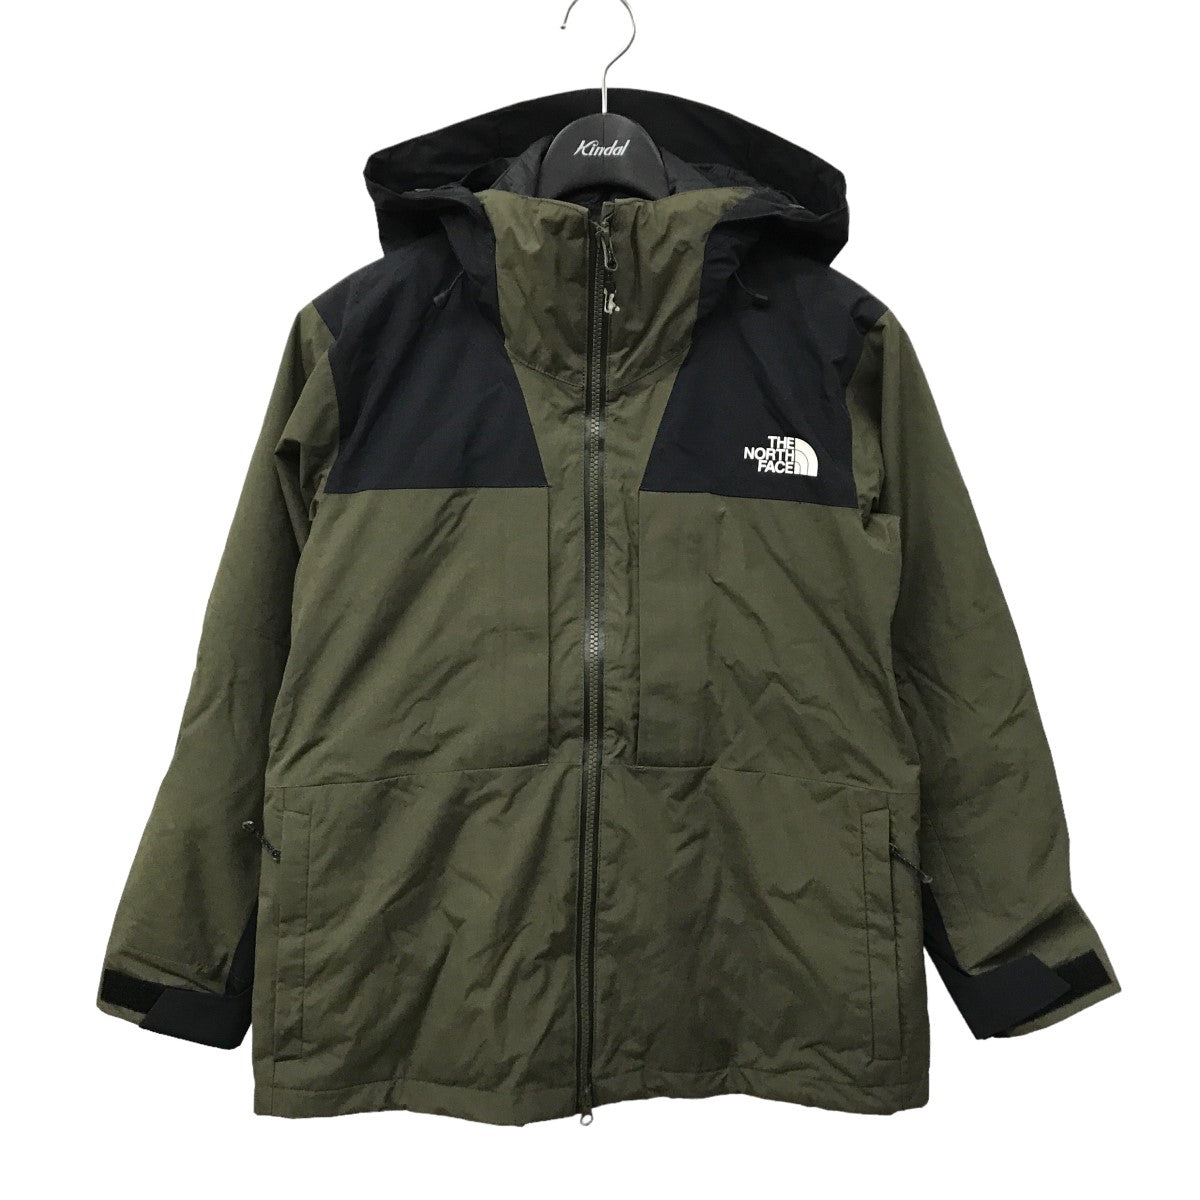 THE NORTH FACE(ザノースフェイス) STORMPEAK TRICLIMATE JACKET ...